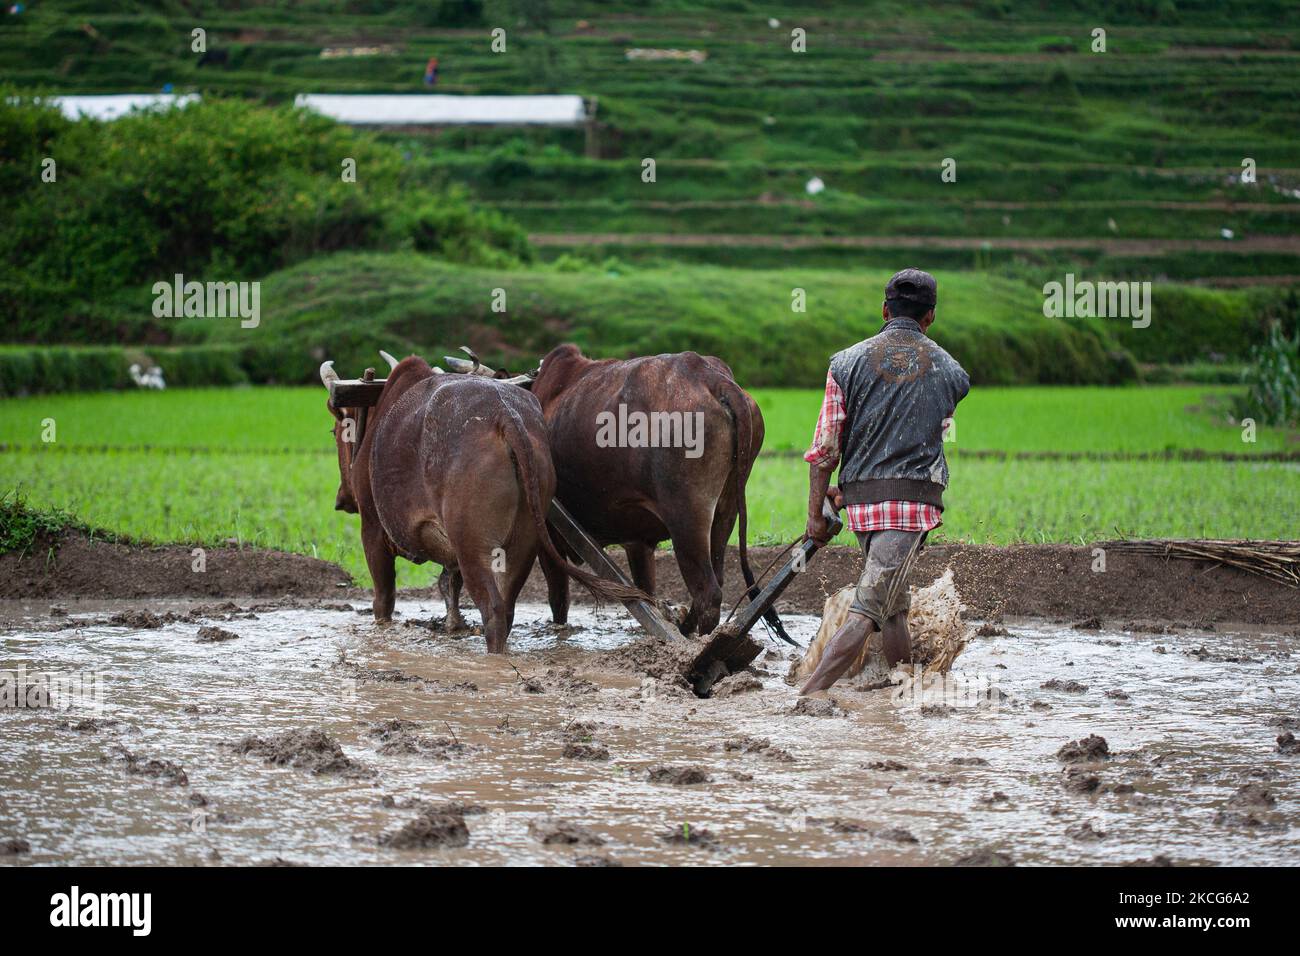 A Nepalese farmer plows the field with a wooden plow pulled by oxen before planting paddy saplings at Chhampi, Lalitpur on Thursday, June 17, 2021. With the onset of the monsoon in Nepal farmers, these days are busy planting paddy saplings. (Photo by Rojan Shrestha/NurPhoto) Stock Photo